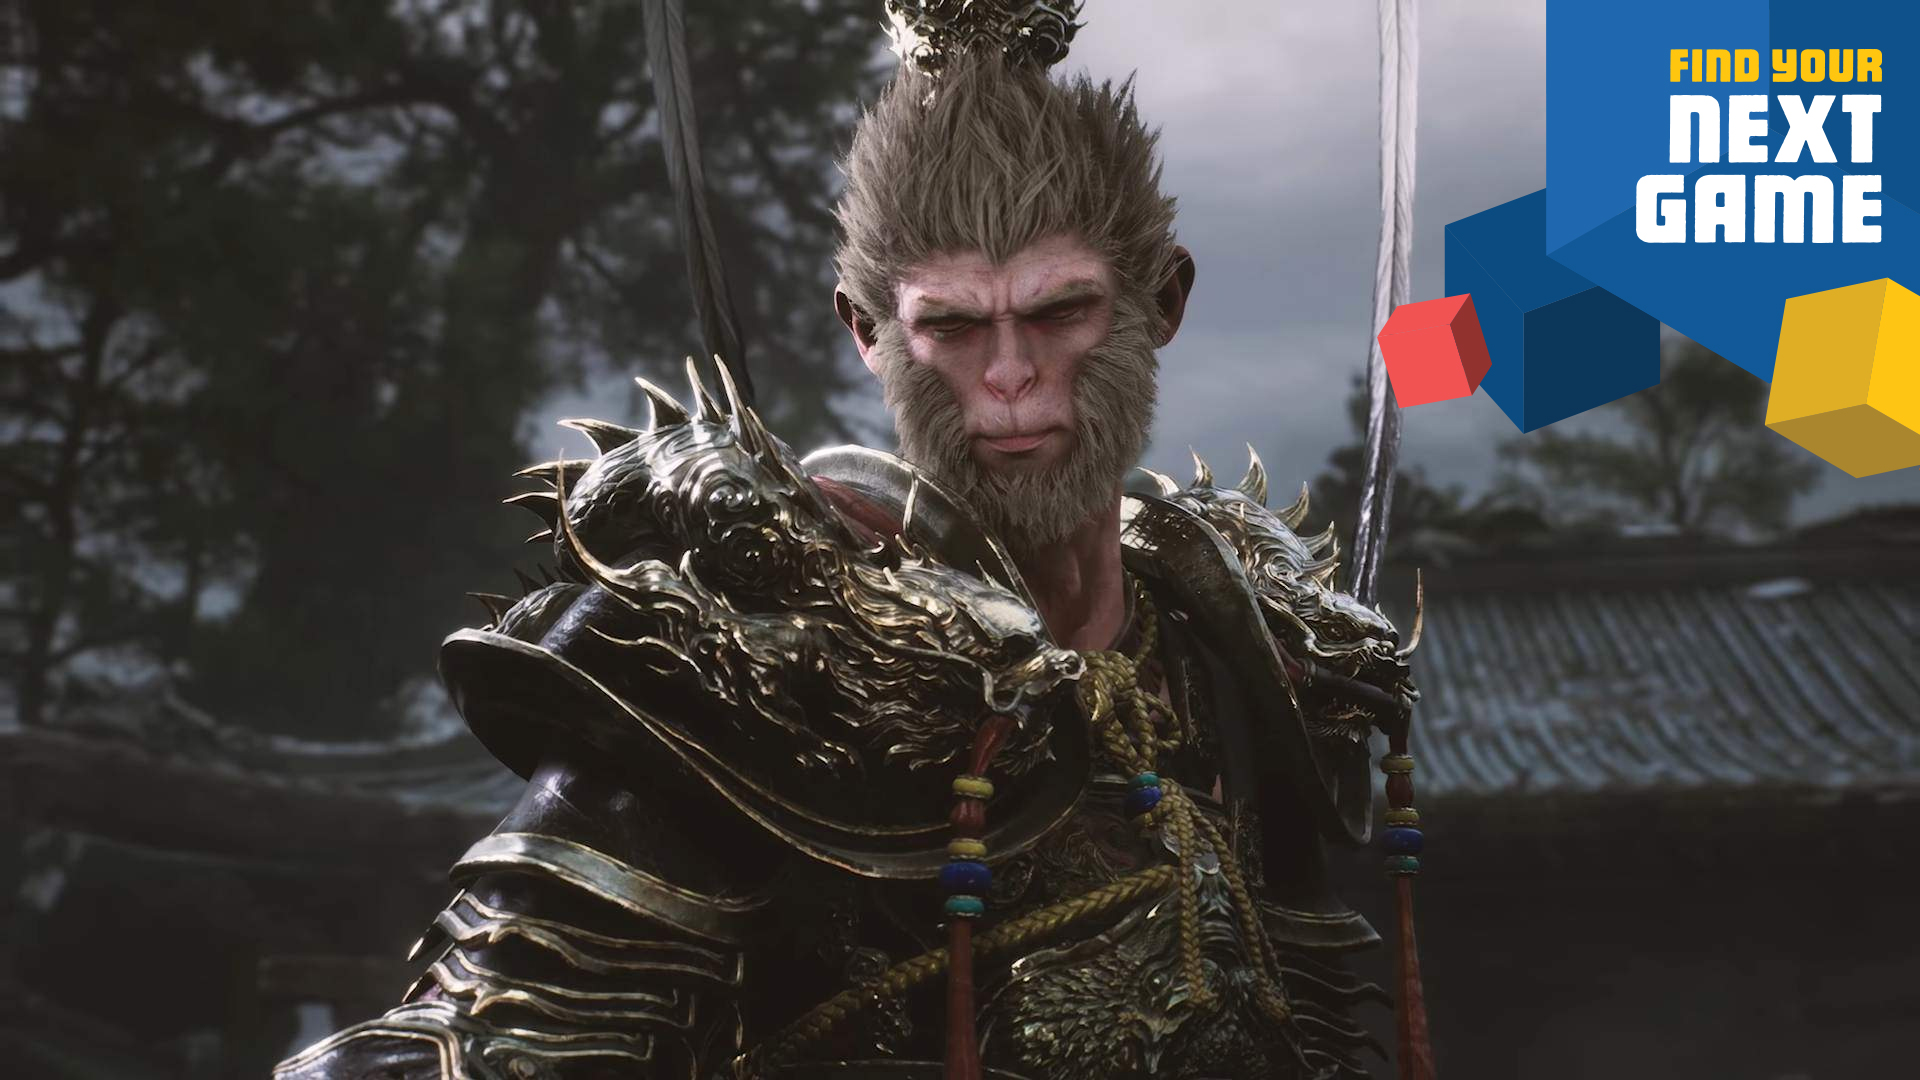 We take stock of ... Black Myth Wukong: genesis, legends and combat system